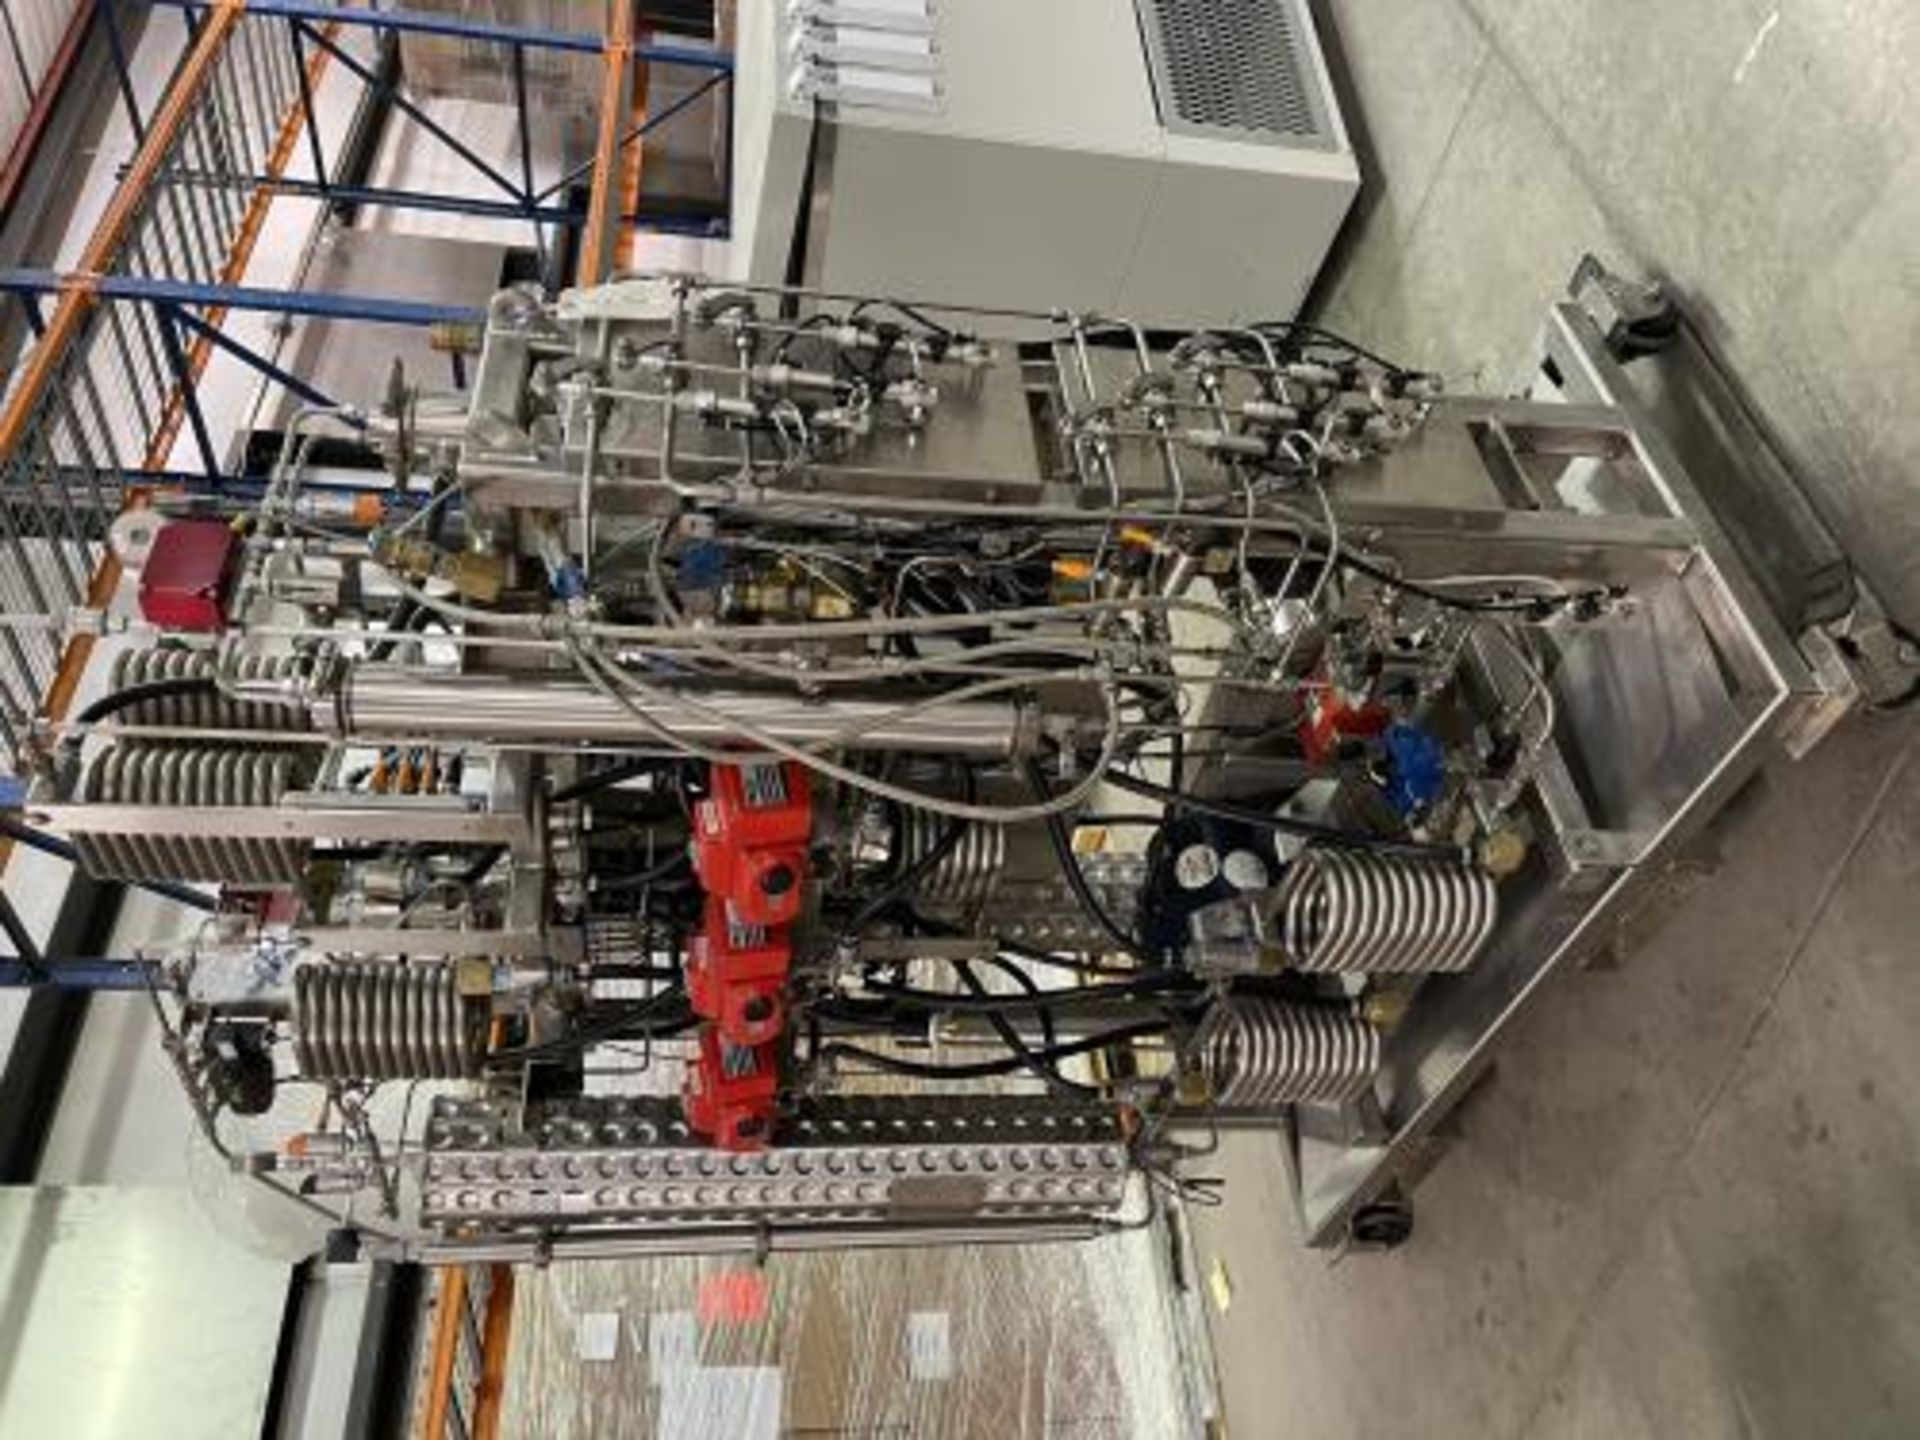 MRX 20 LE Supercritical CO2 Automated Extractor System - Image 9 of 41